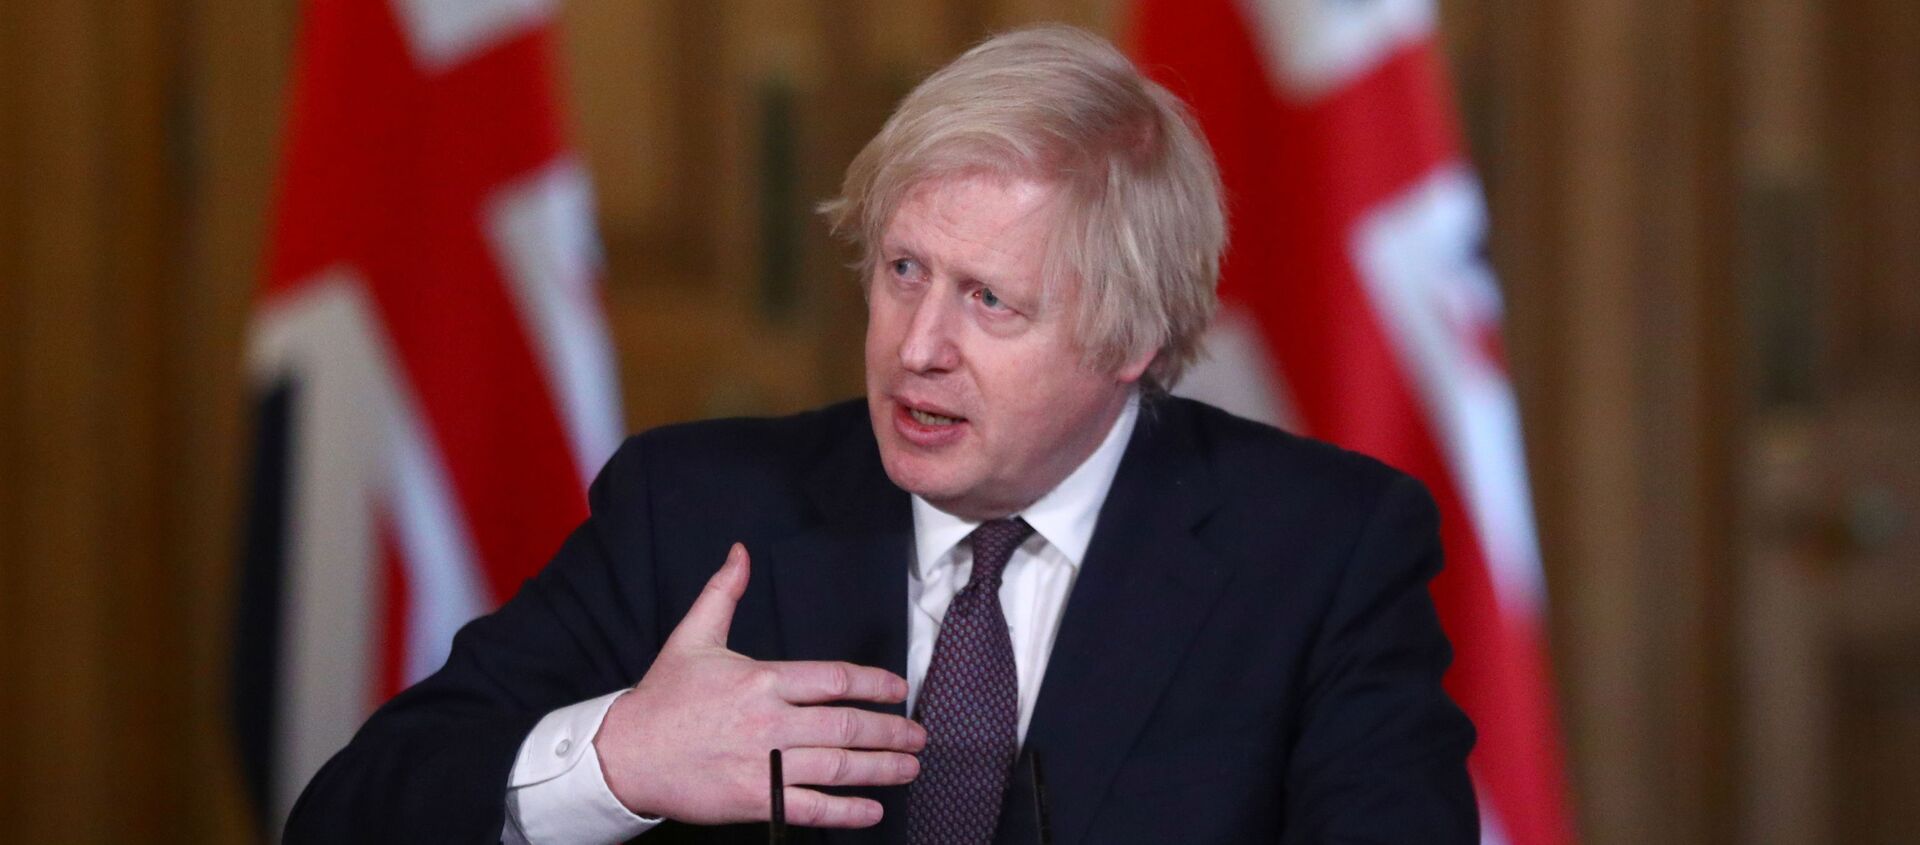 Britain's Prime Minister Boris Johnson holds a virtual news conference at 10 Downing Street, amid the coronavirus disease (COVID-19) outbreak, in London, Britain, March 8, 2021. - Sputnik International, 1920, 16.03.2021